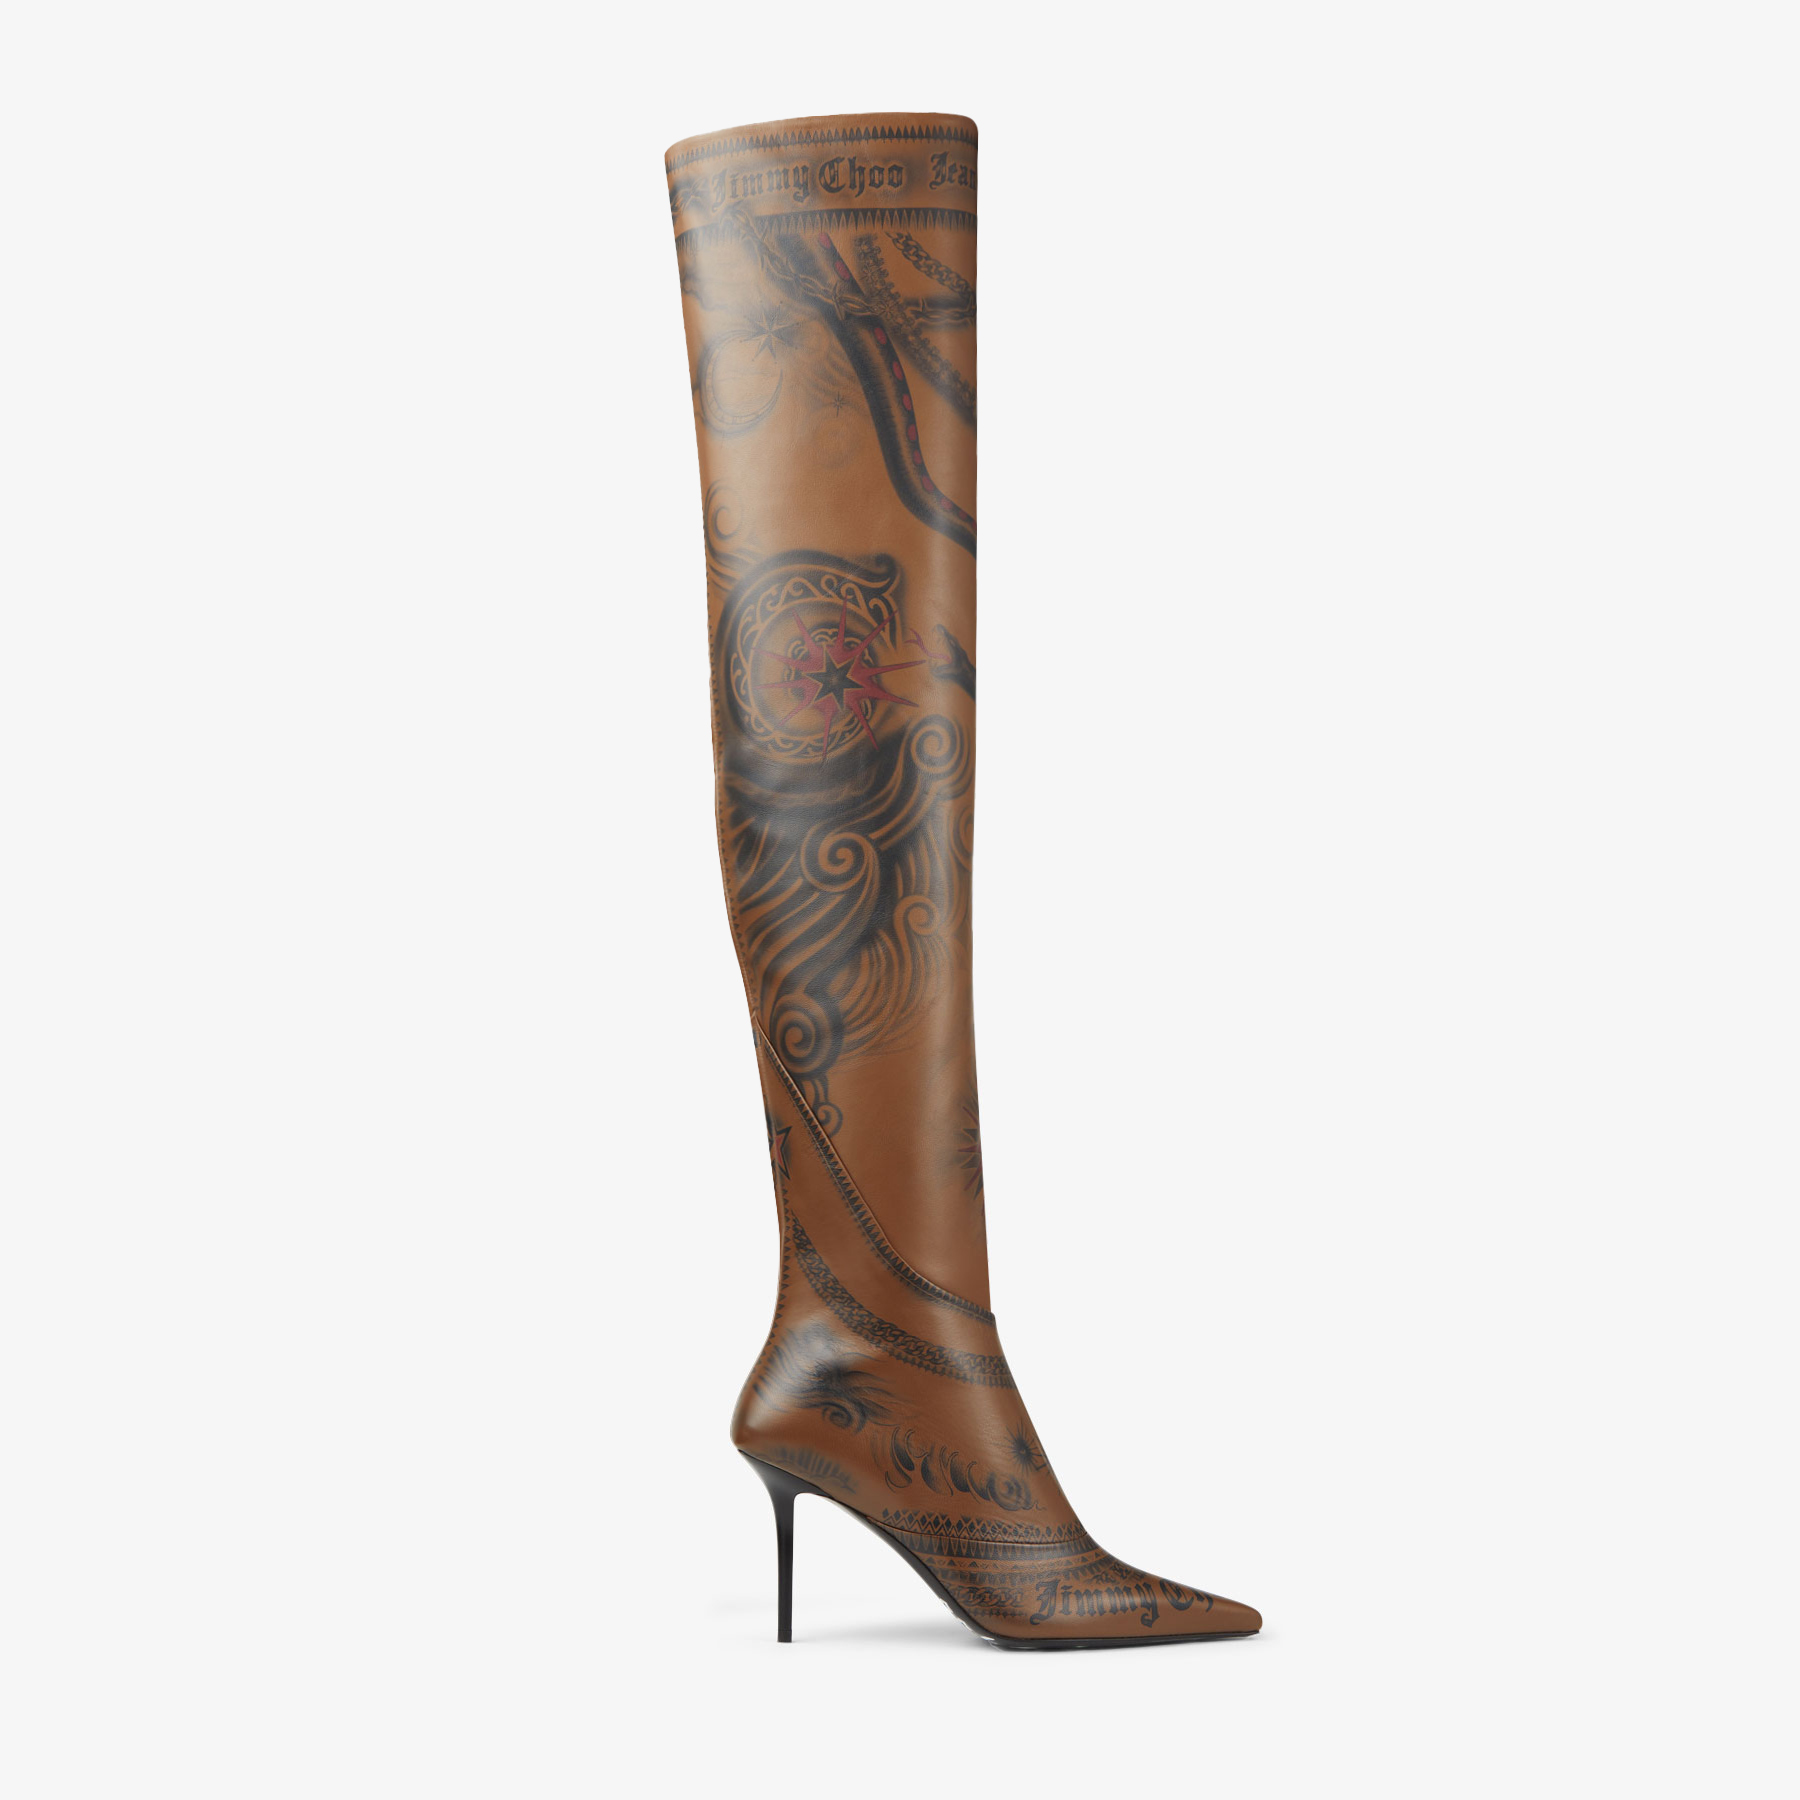 Jean paul gaultier jimmy choo over the knee boots brown 90